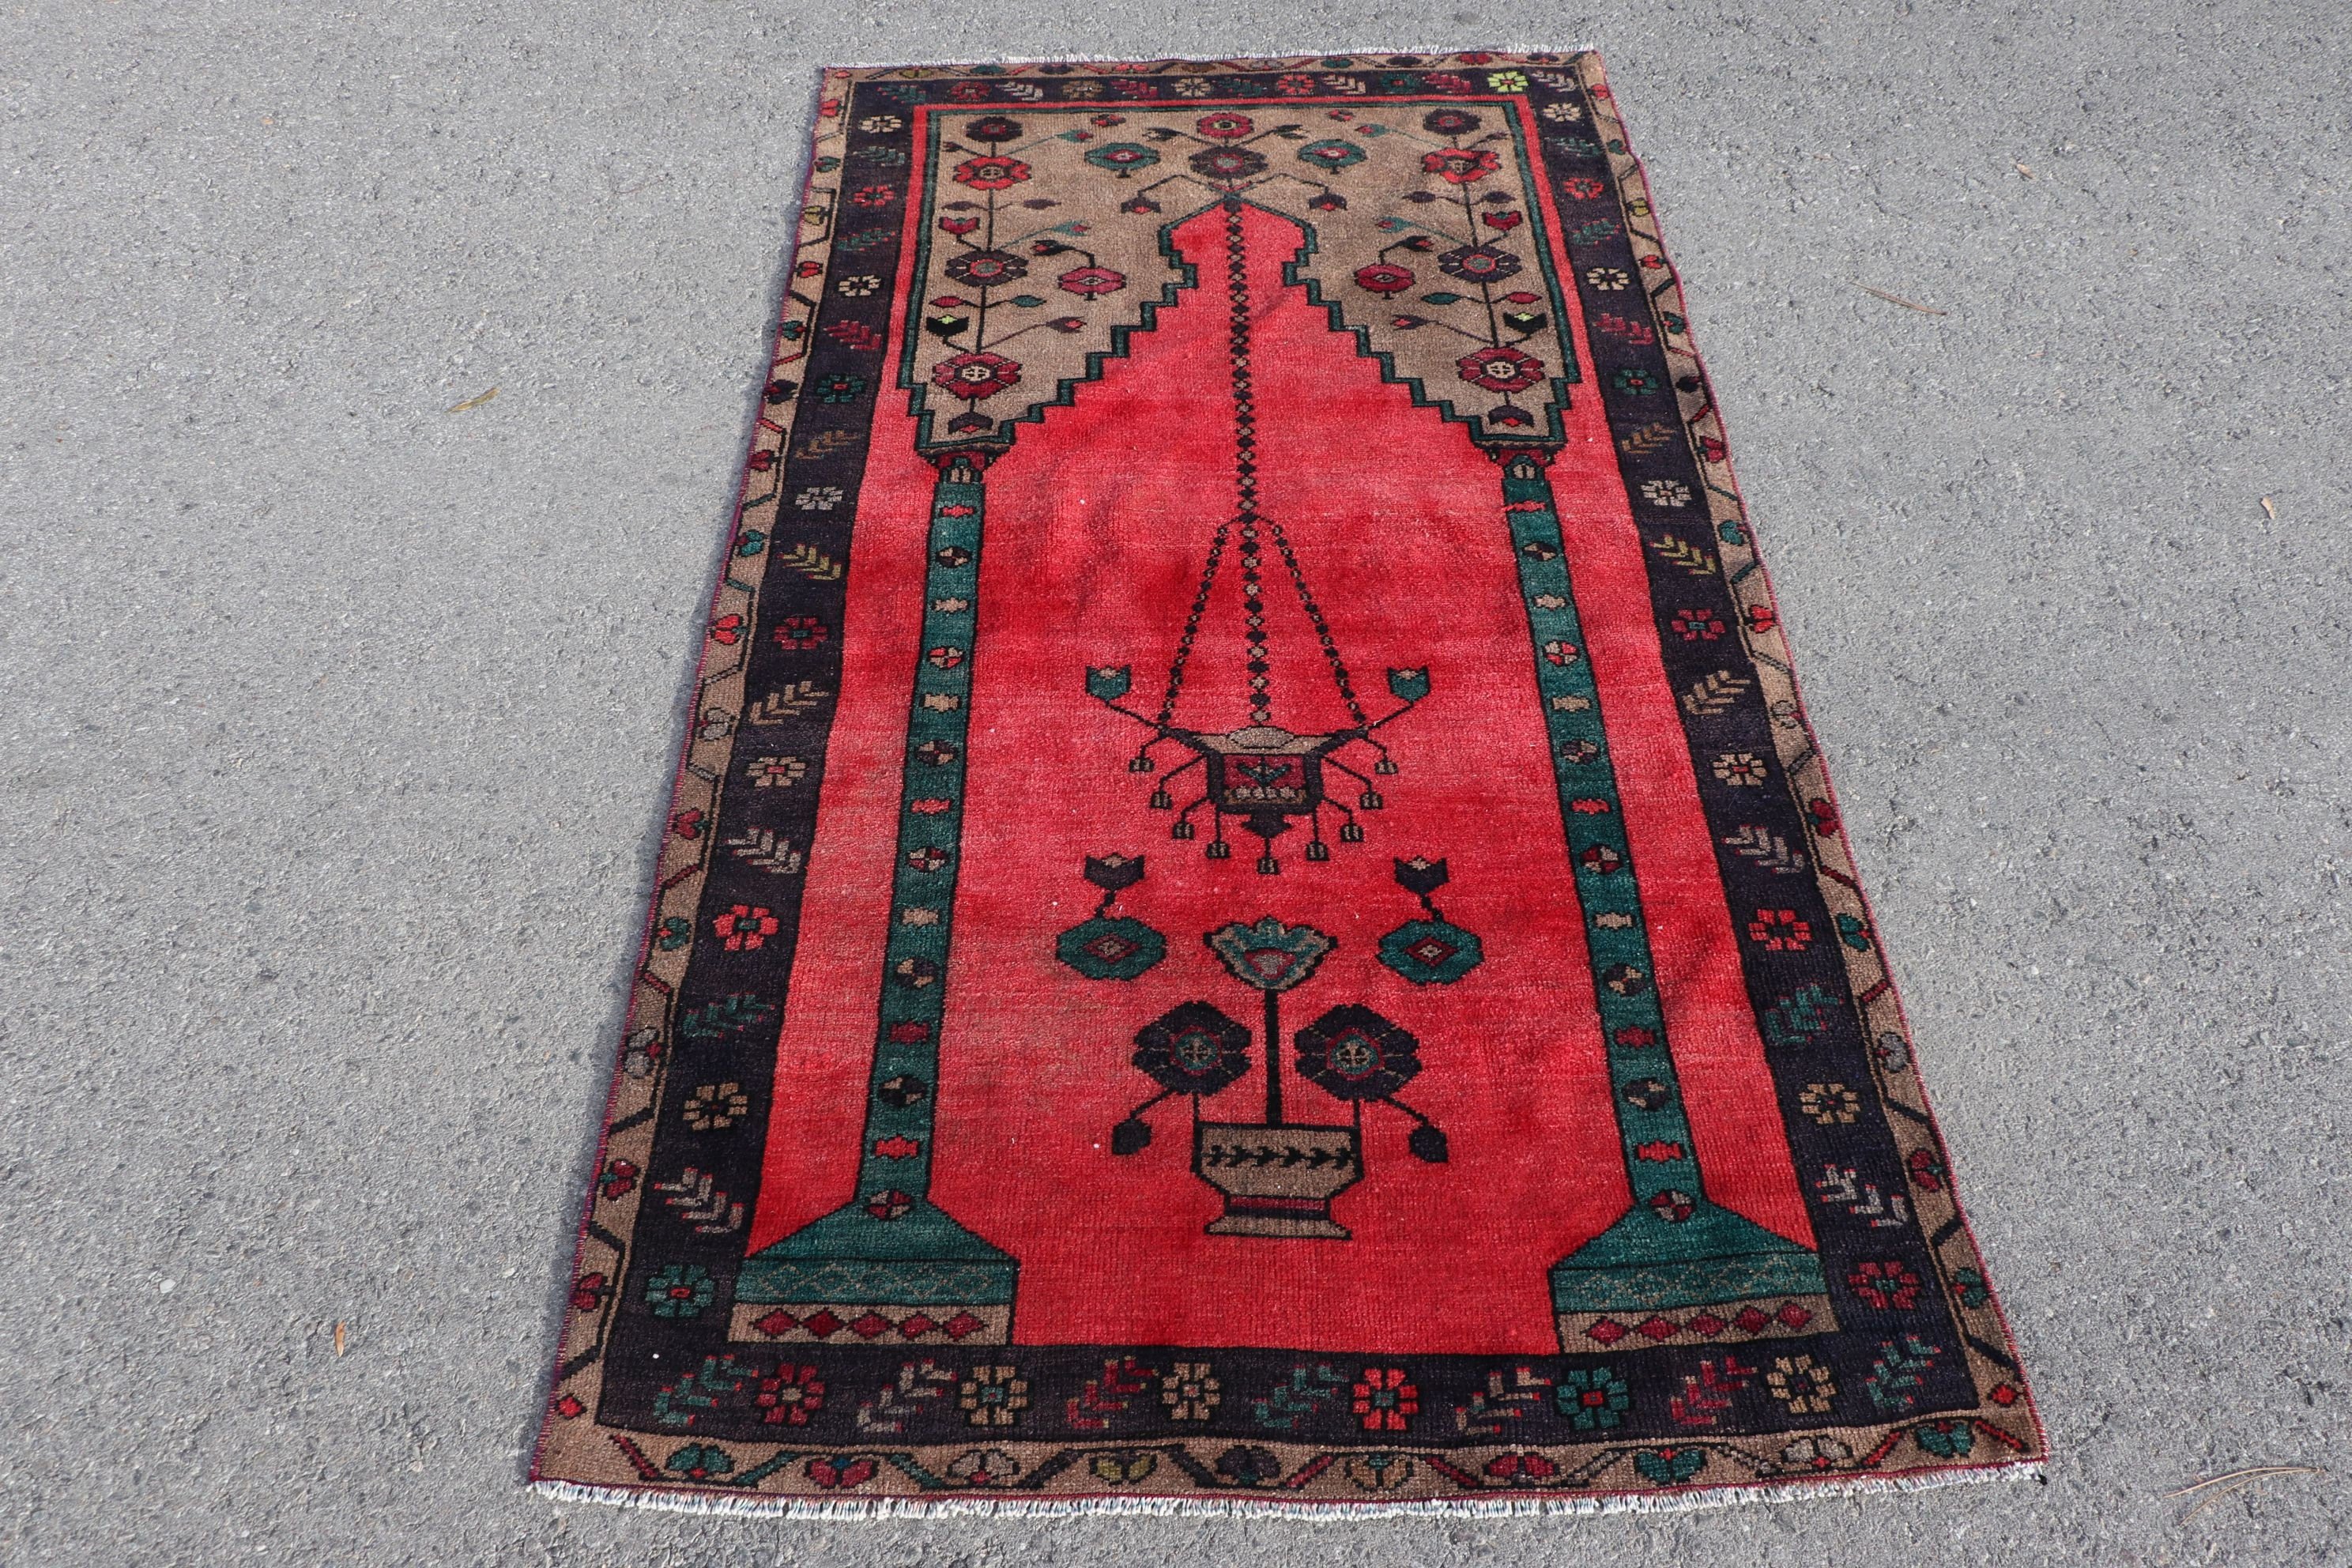 Rugs for Nursery, Anatolian Rugs, Turkish Rug, Vintage Rug, Floor Rug, Nursery Rug, Black Floor Rugs, 3.4x6.3 ft Accent Rugs, Entry Rug